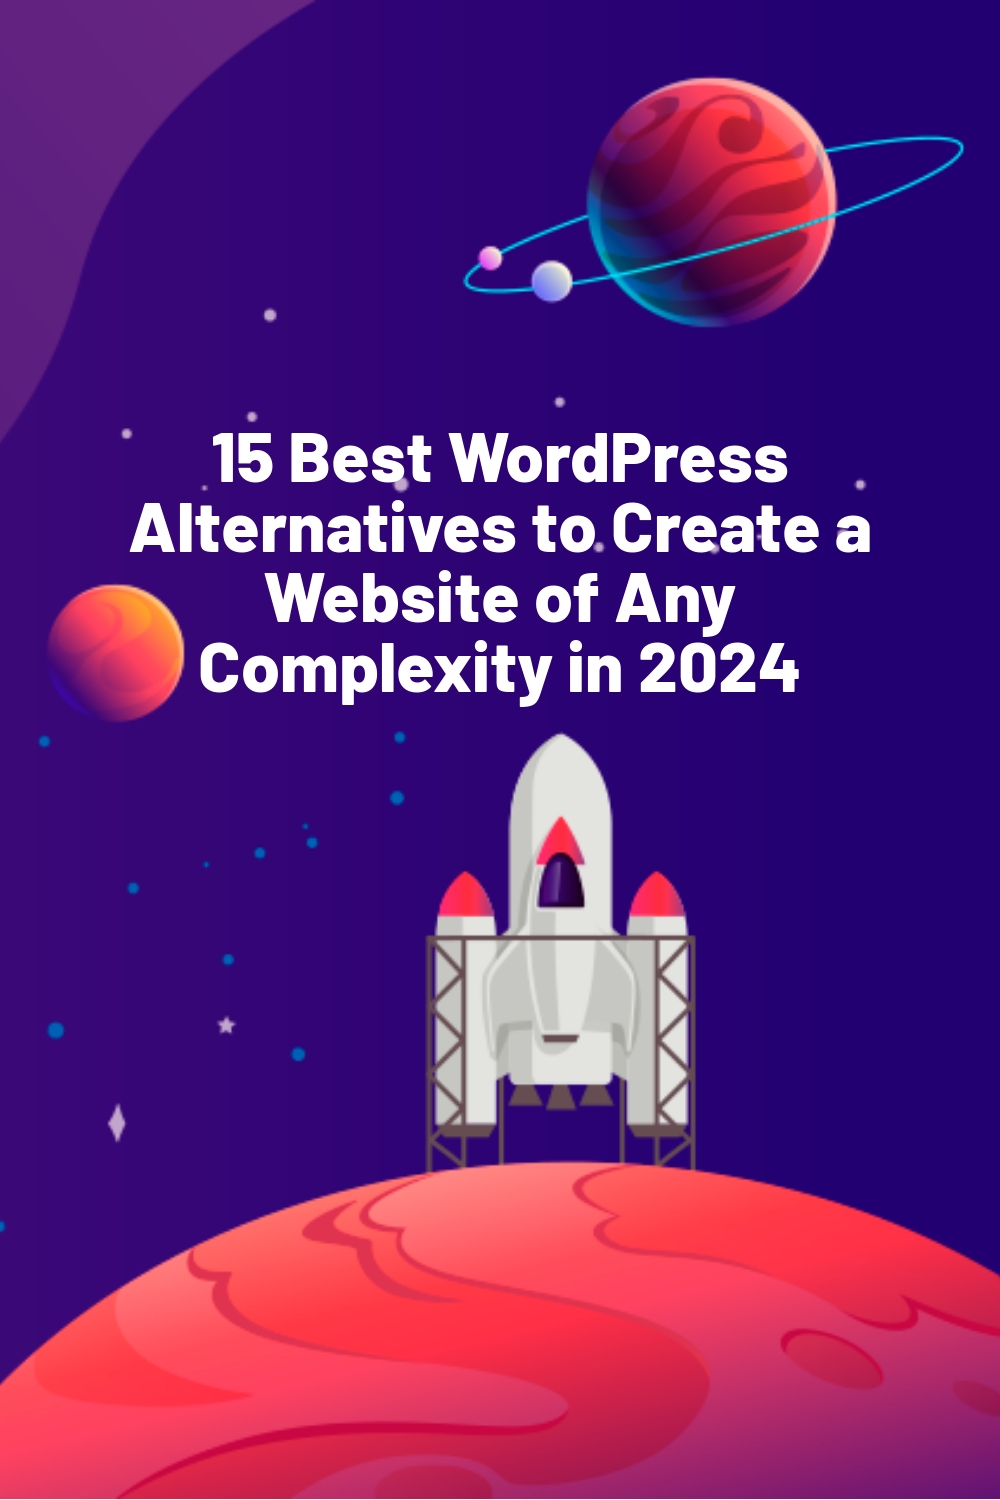 15 Best WordPress Alternatives to Create a Website of Any Complexity in 2024